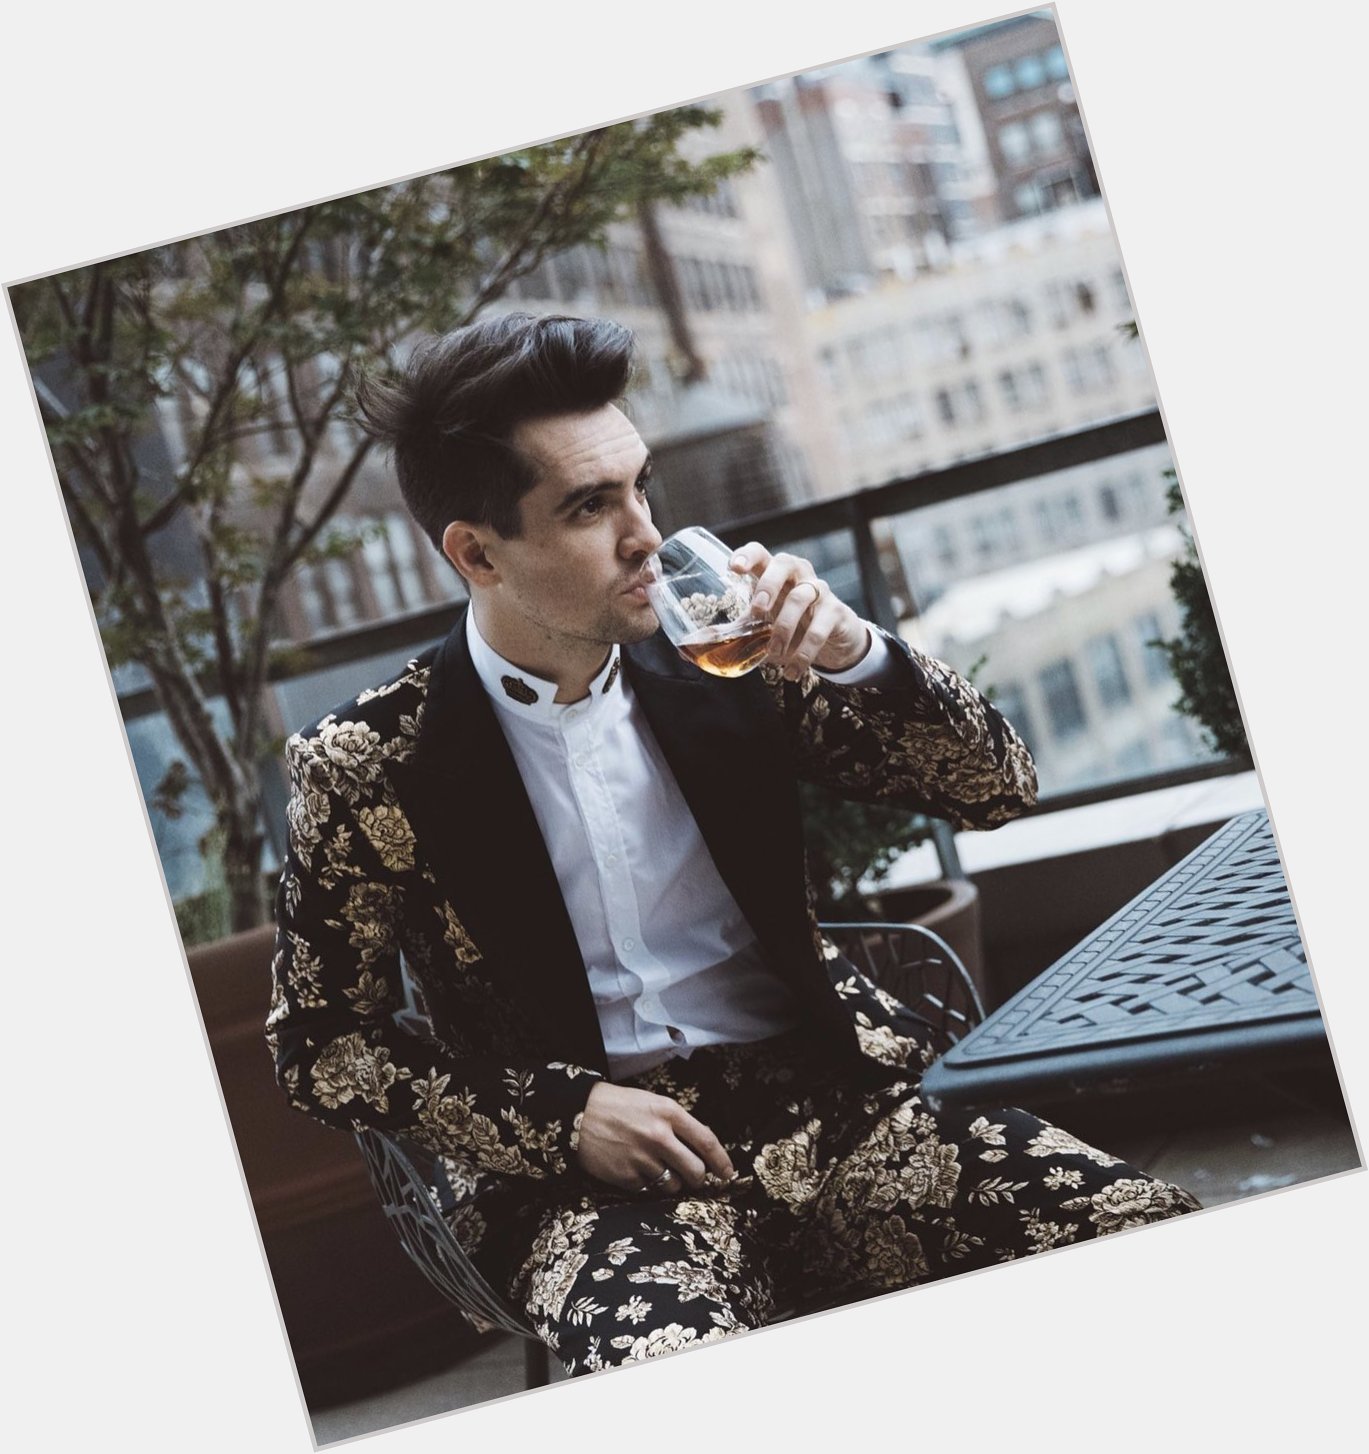 Happy 35th birthday to brendon urie! 